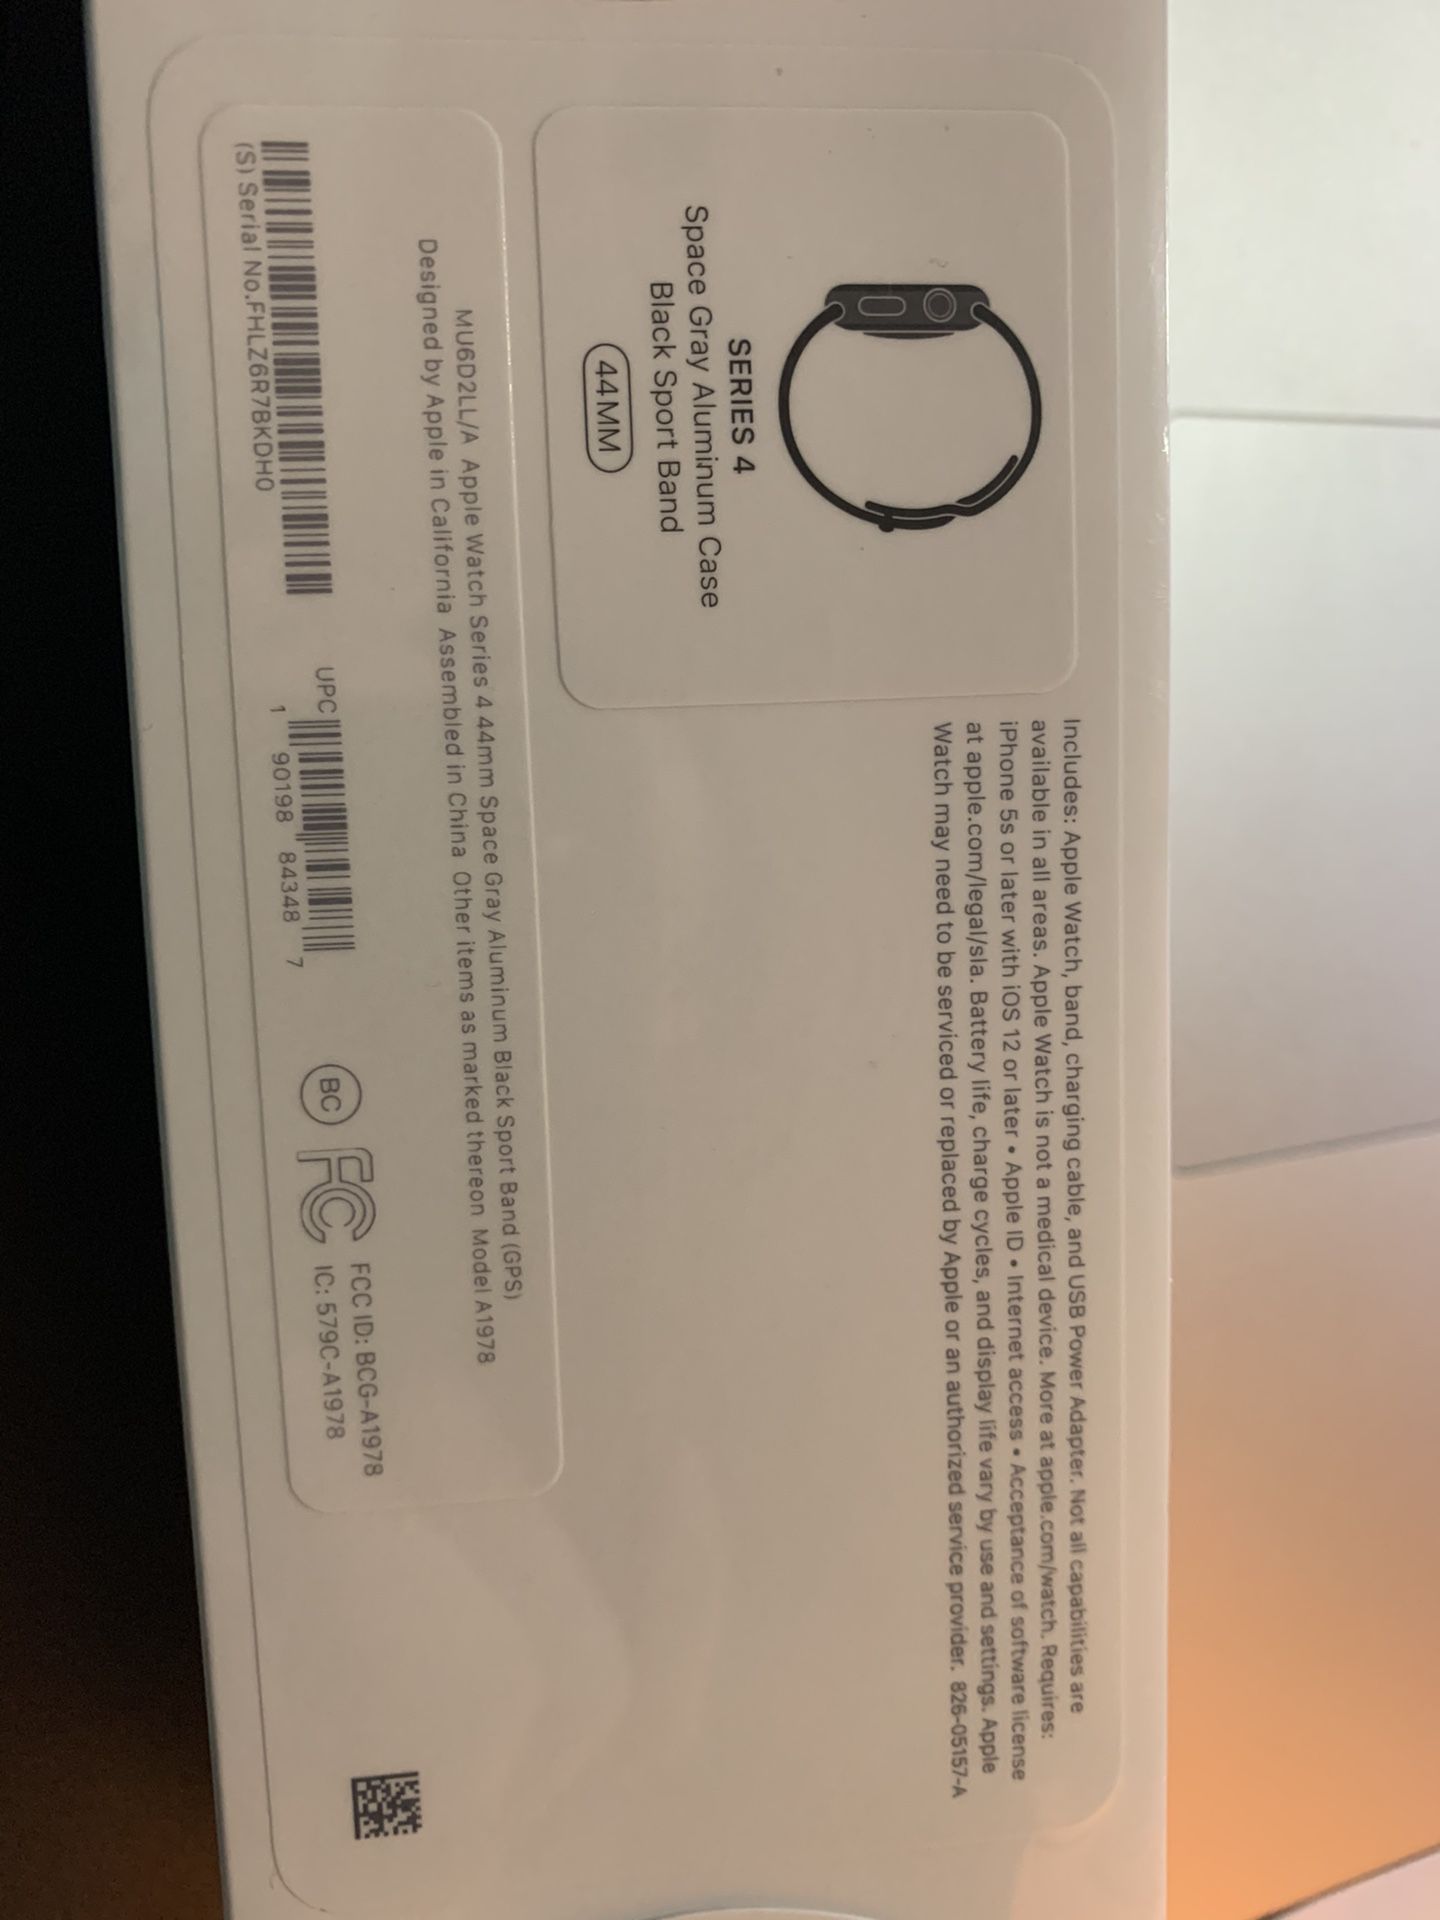 Apple Watch Series 4 - GPS, 44mm - Space Gray - Black Sport Band - Brand new - Sealed